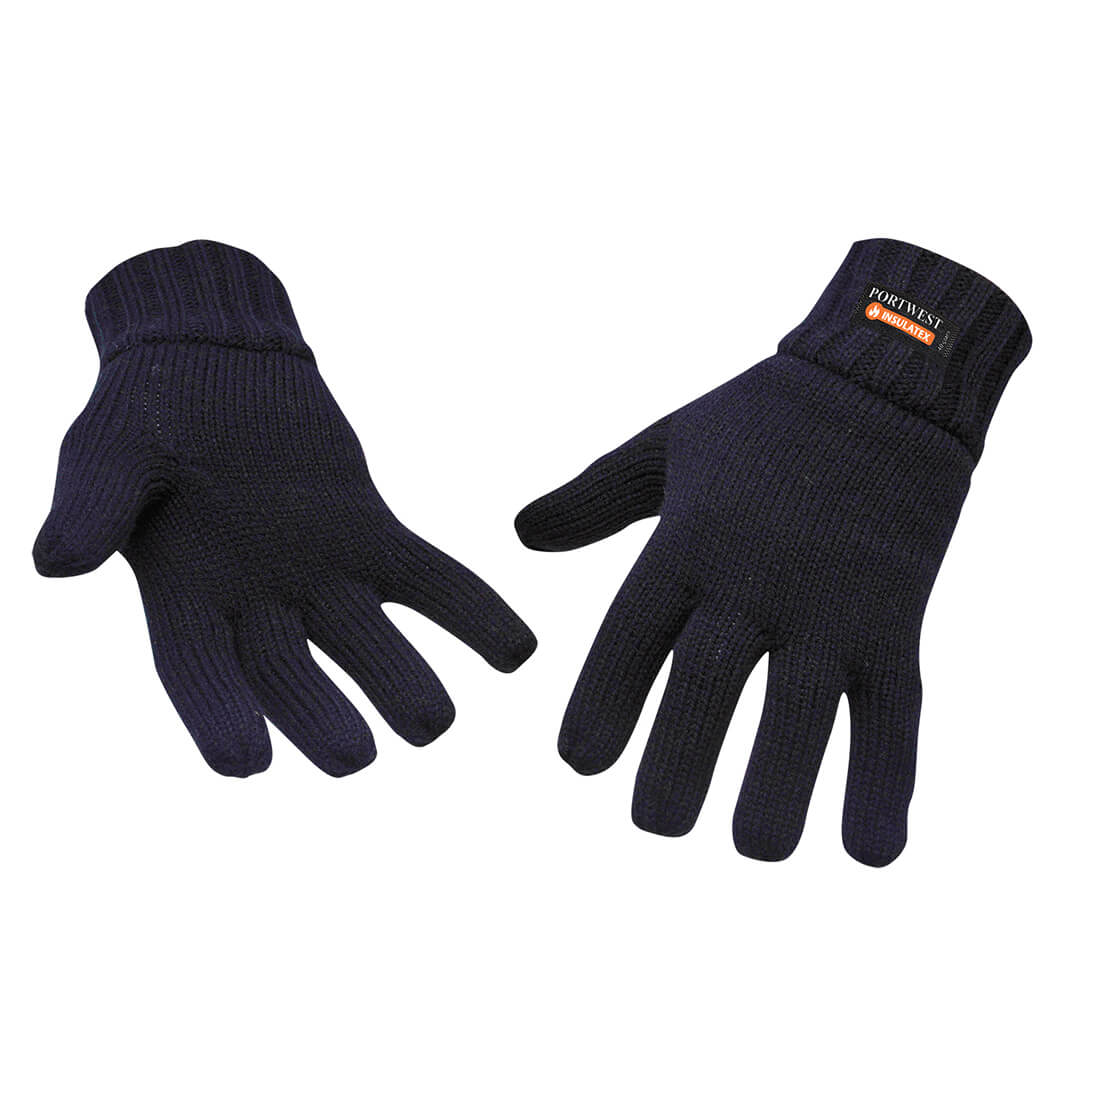 Image of Portwest Insulatex Lined Knit Gloves Navy One Size